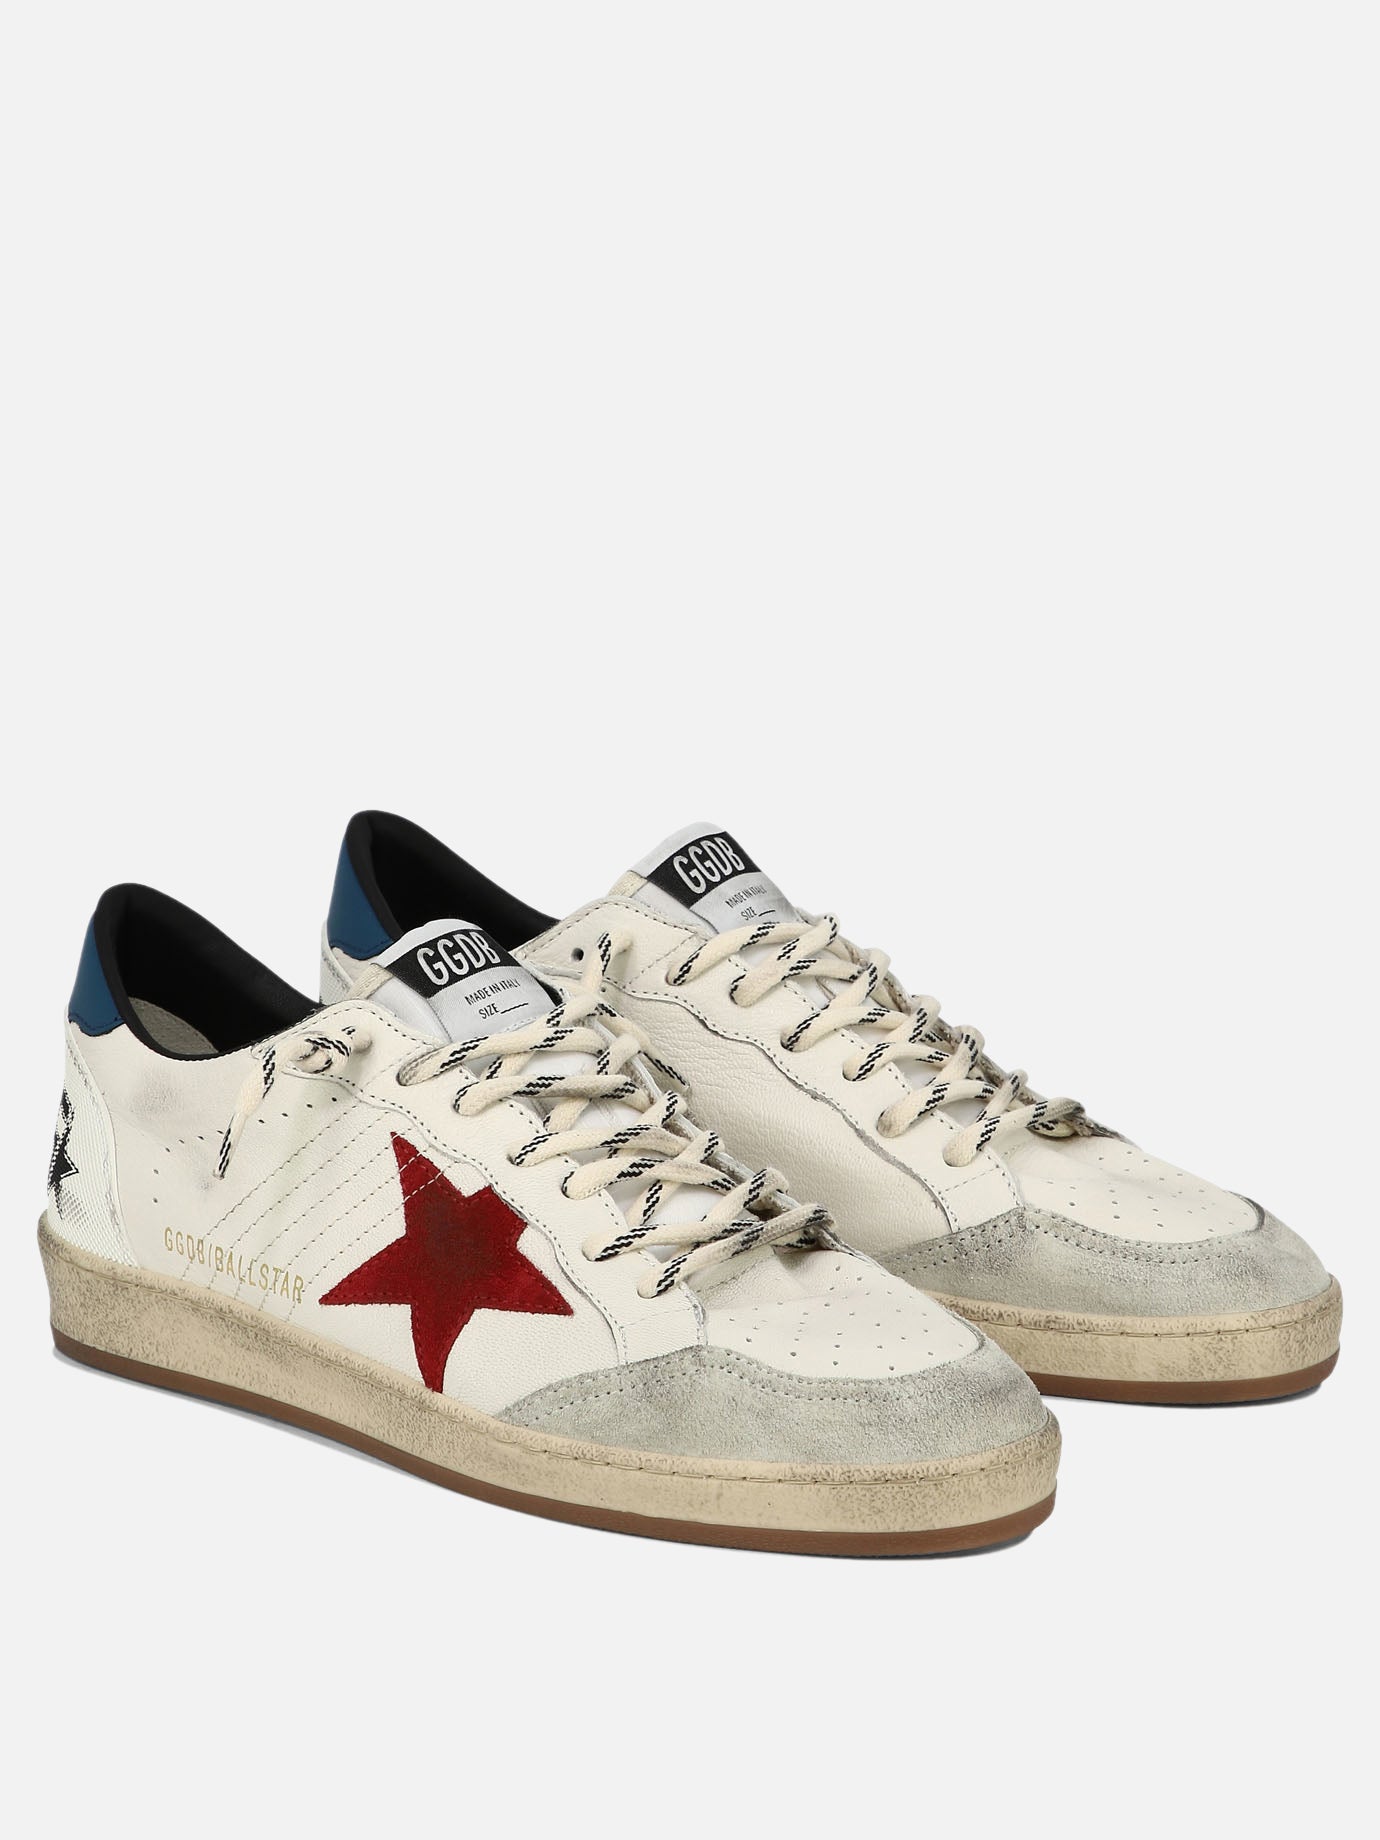 "Ball Star" sneakers